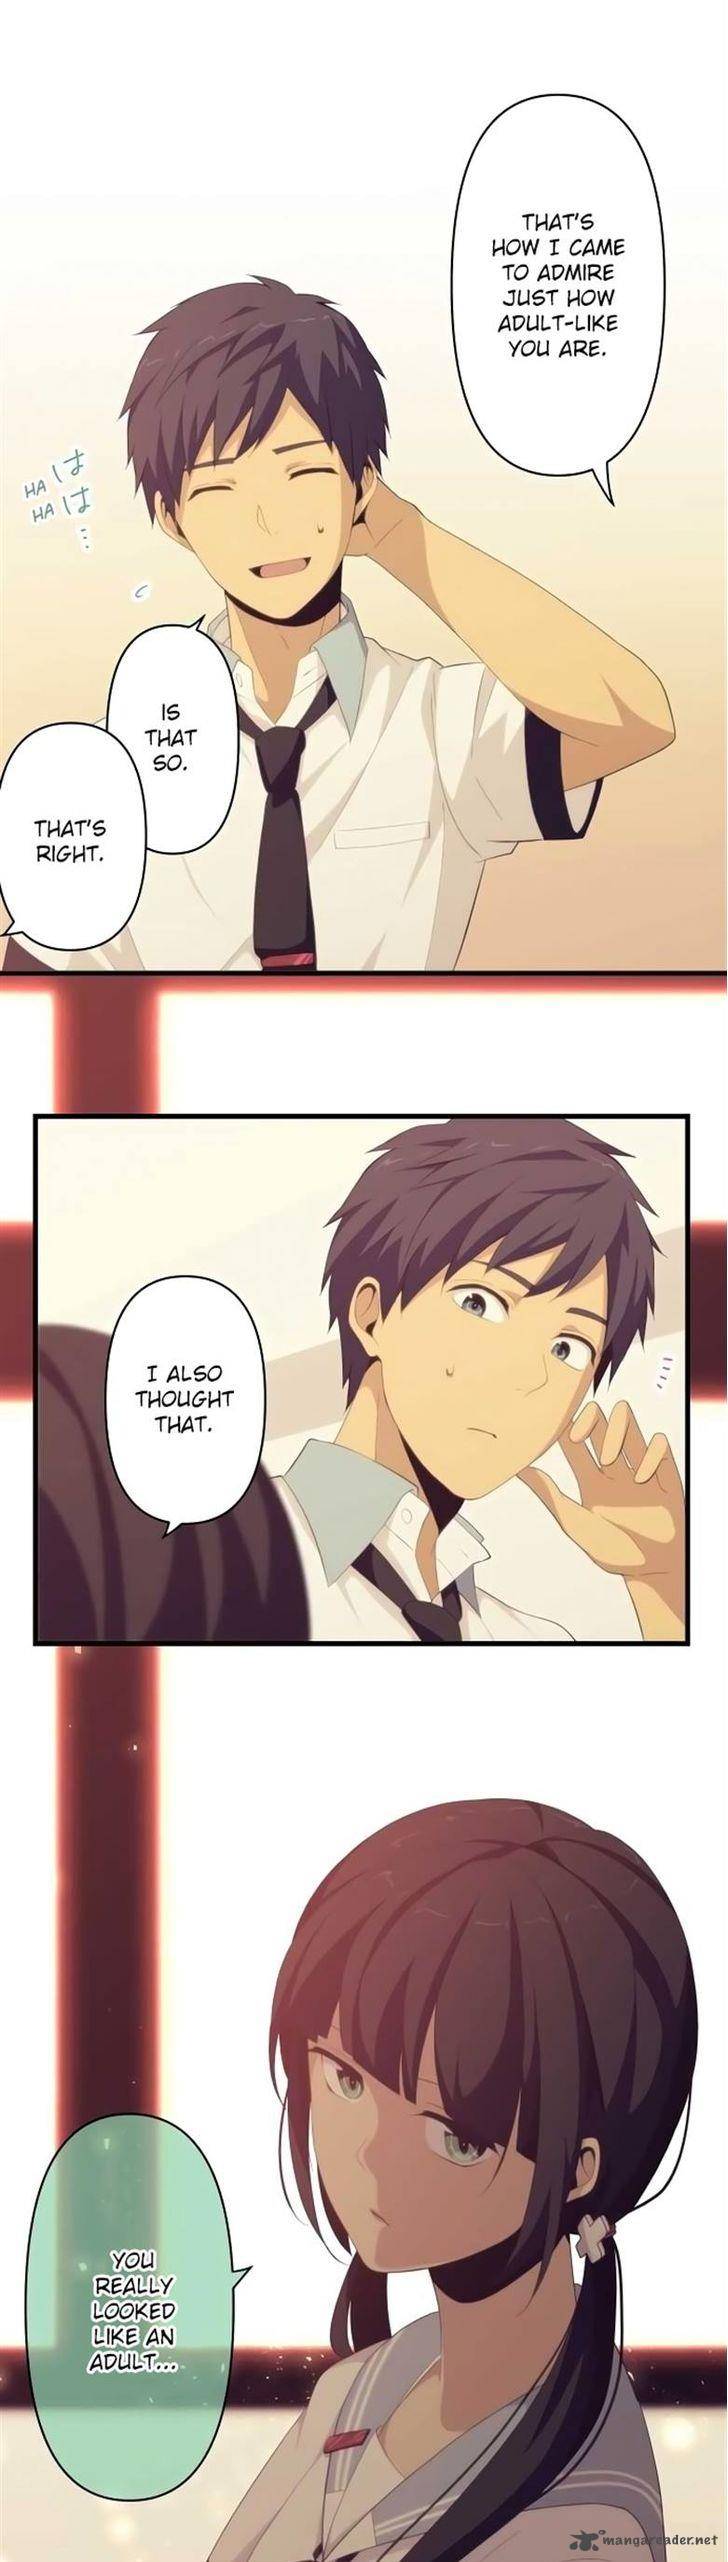 Relife 130 5